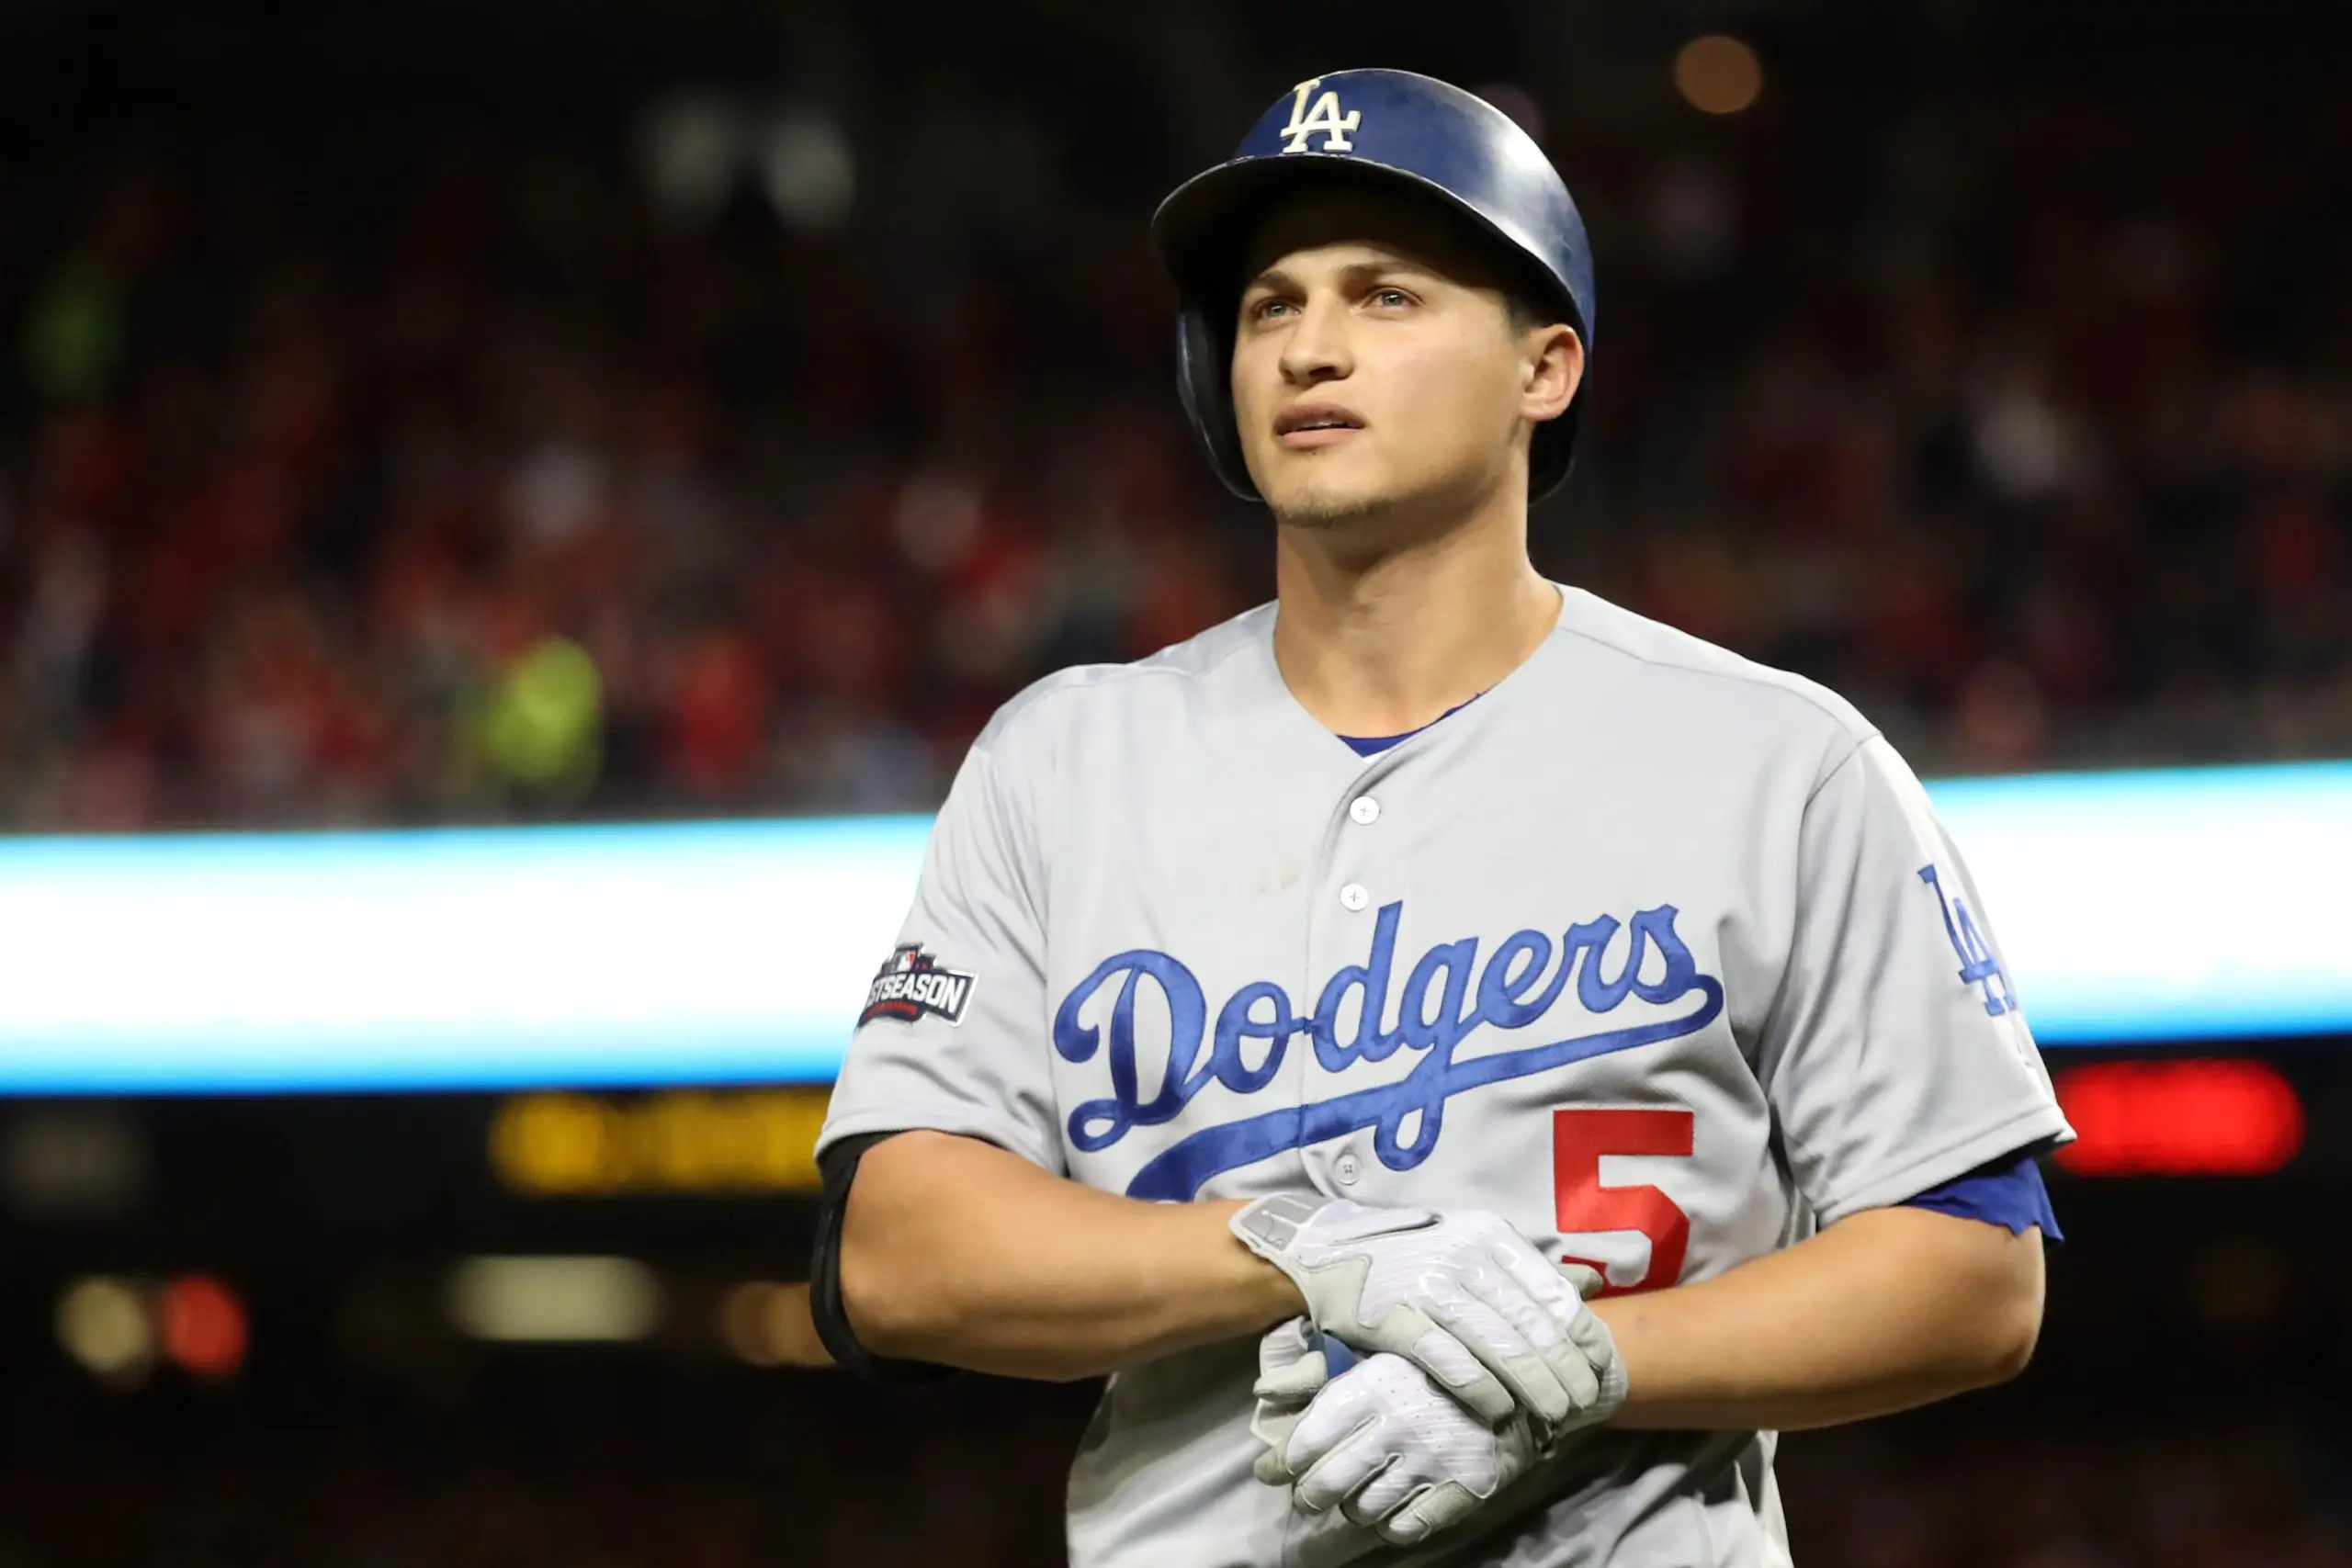 Dodgers News Corey Seager Predicted to Be a Top5 Shortstop in 2025